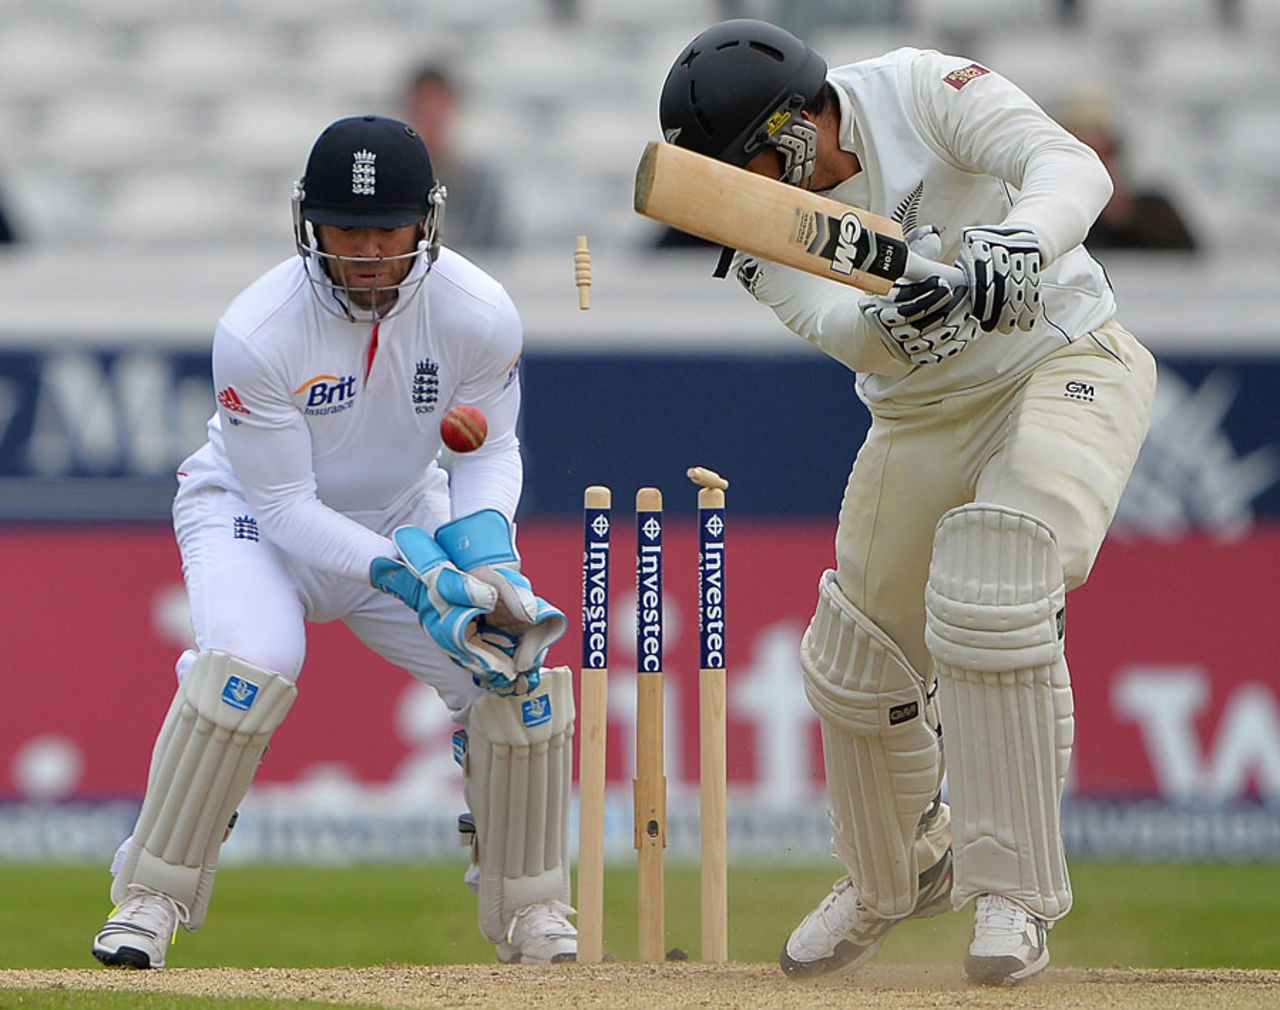 Ross Taylor was bowled late in the day, England v New Zealand, 2nd Investec Test, Headingley, 4th day, May 27, 2013